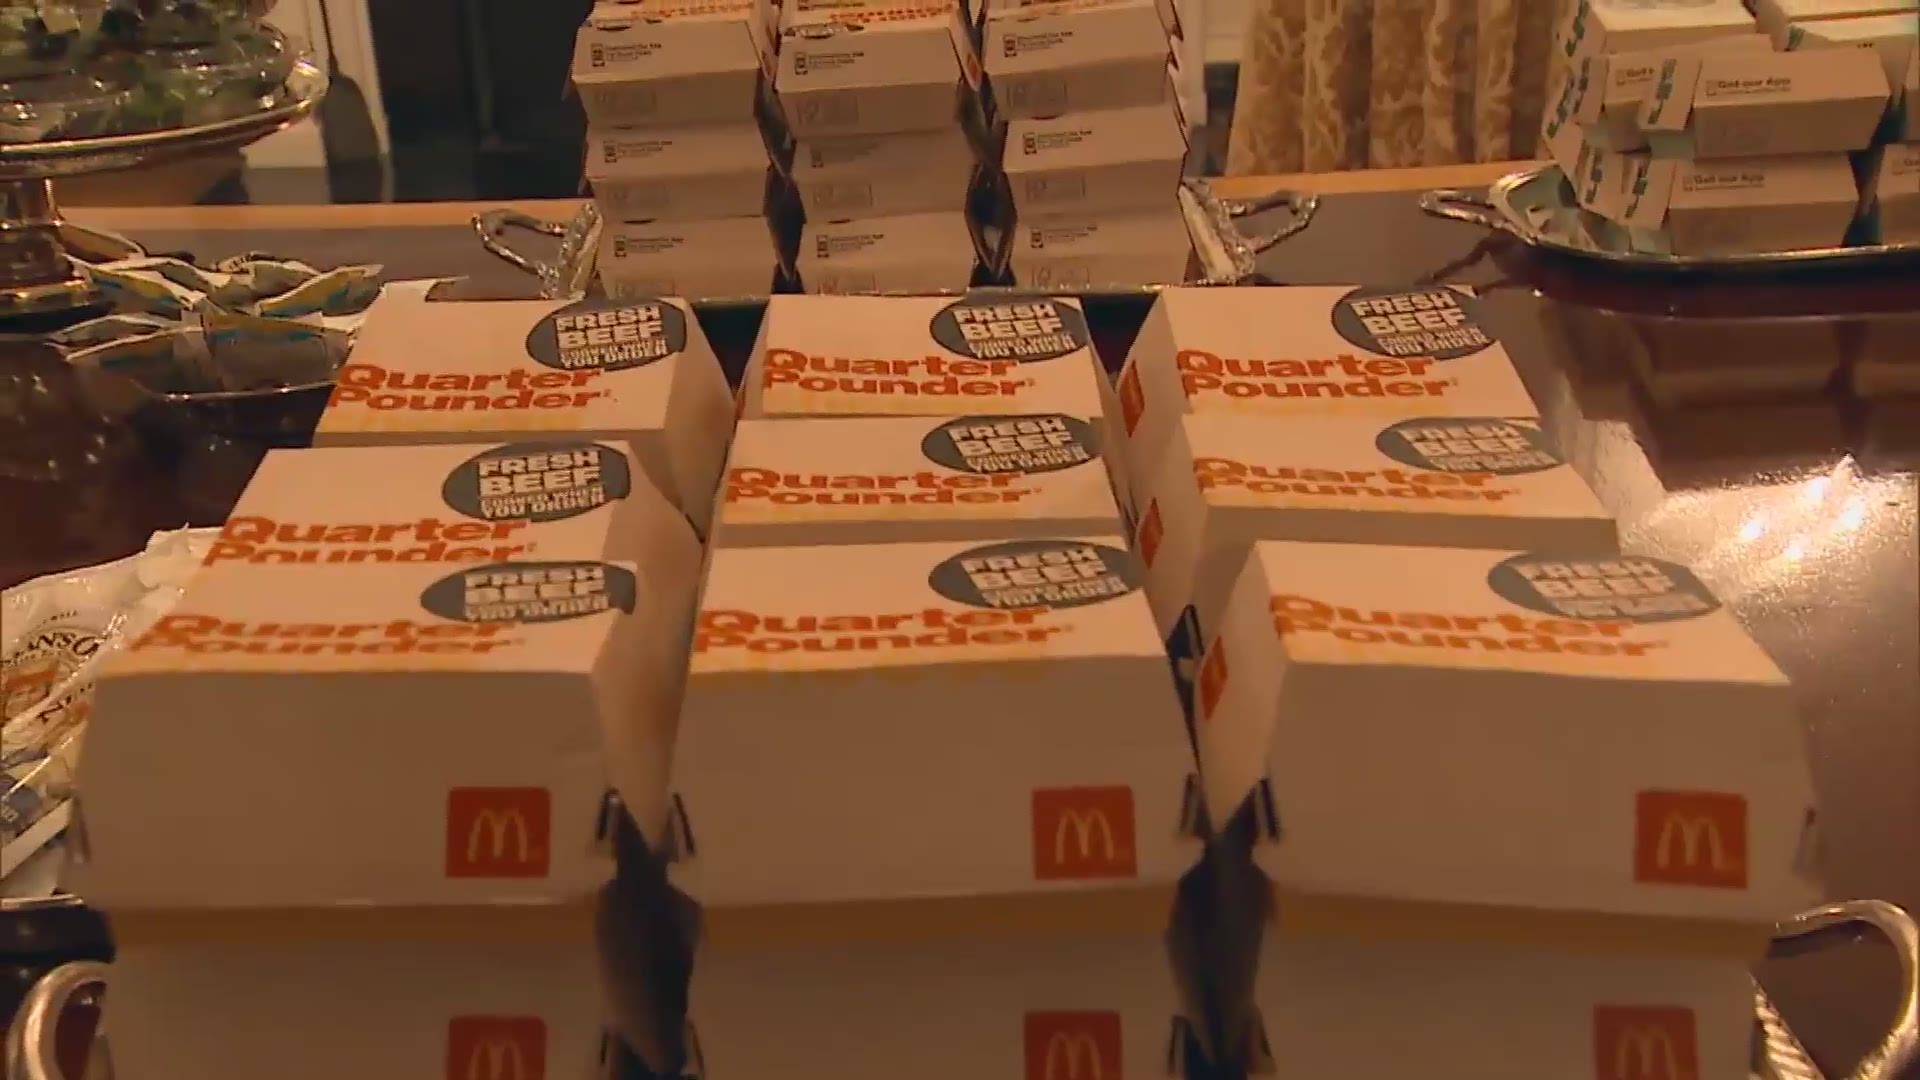 President Trump gave the Clemson Tigers a dinner of McDonald's, Wendy's, Burger King, and Domino's when they came to the White House on January 14, 2019.